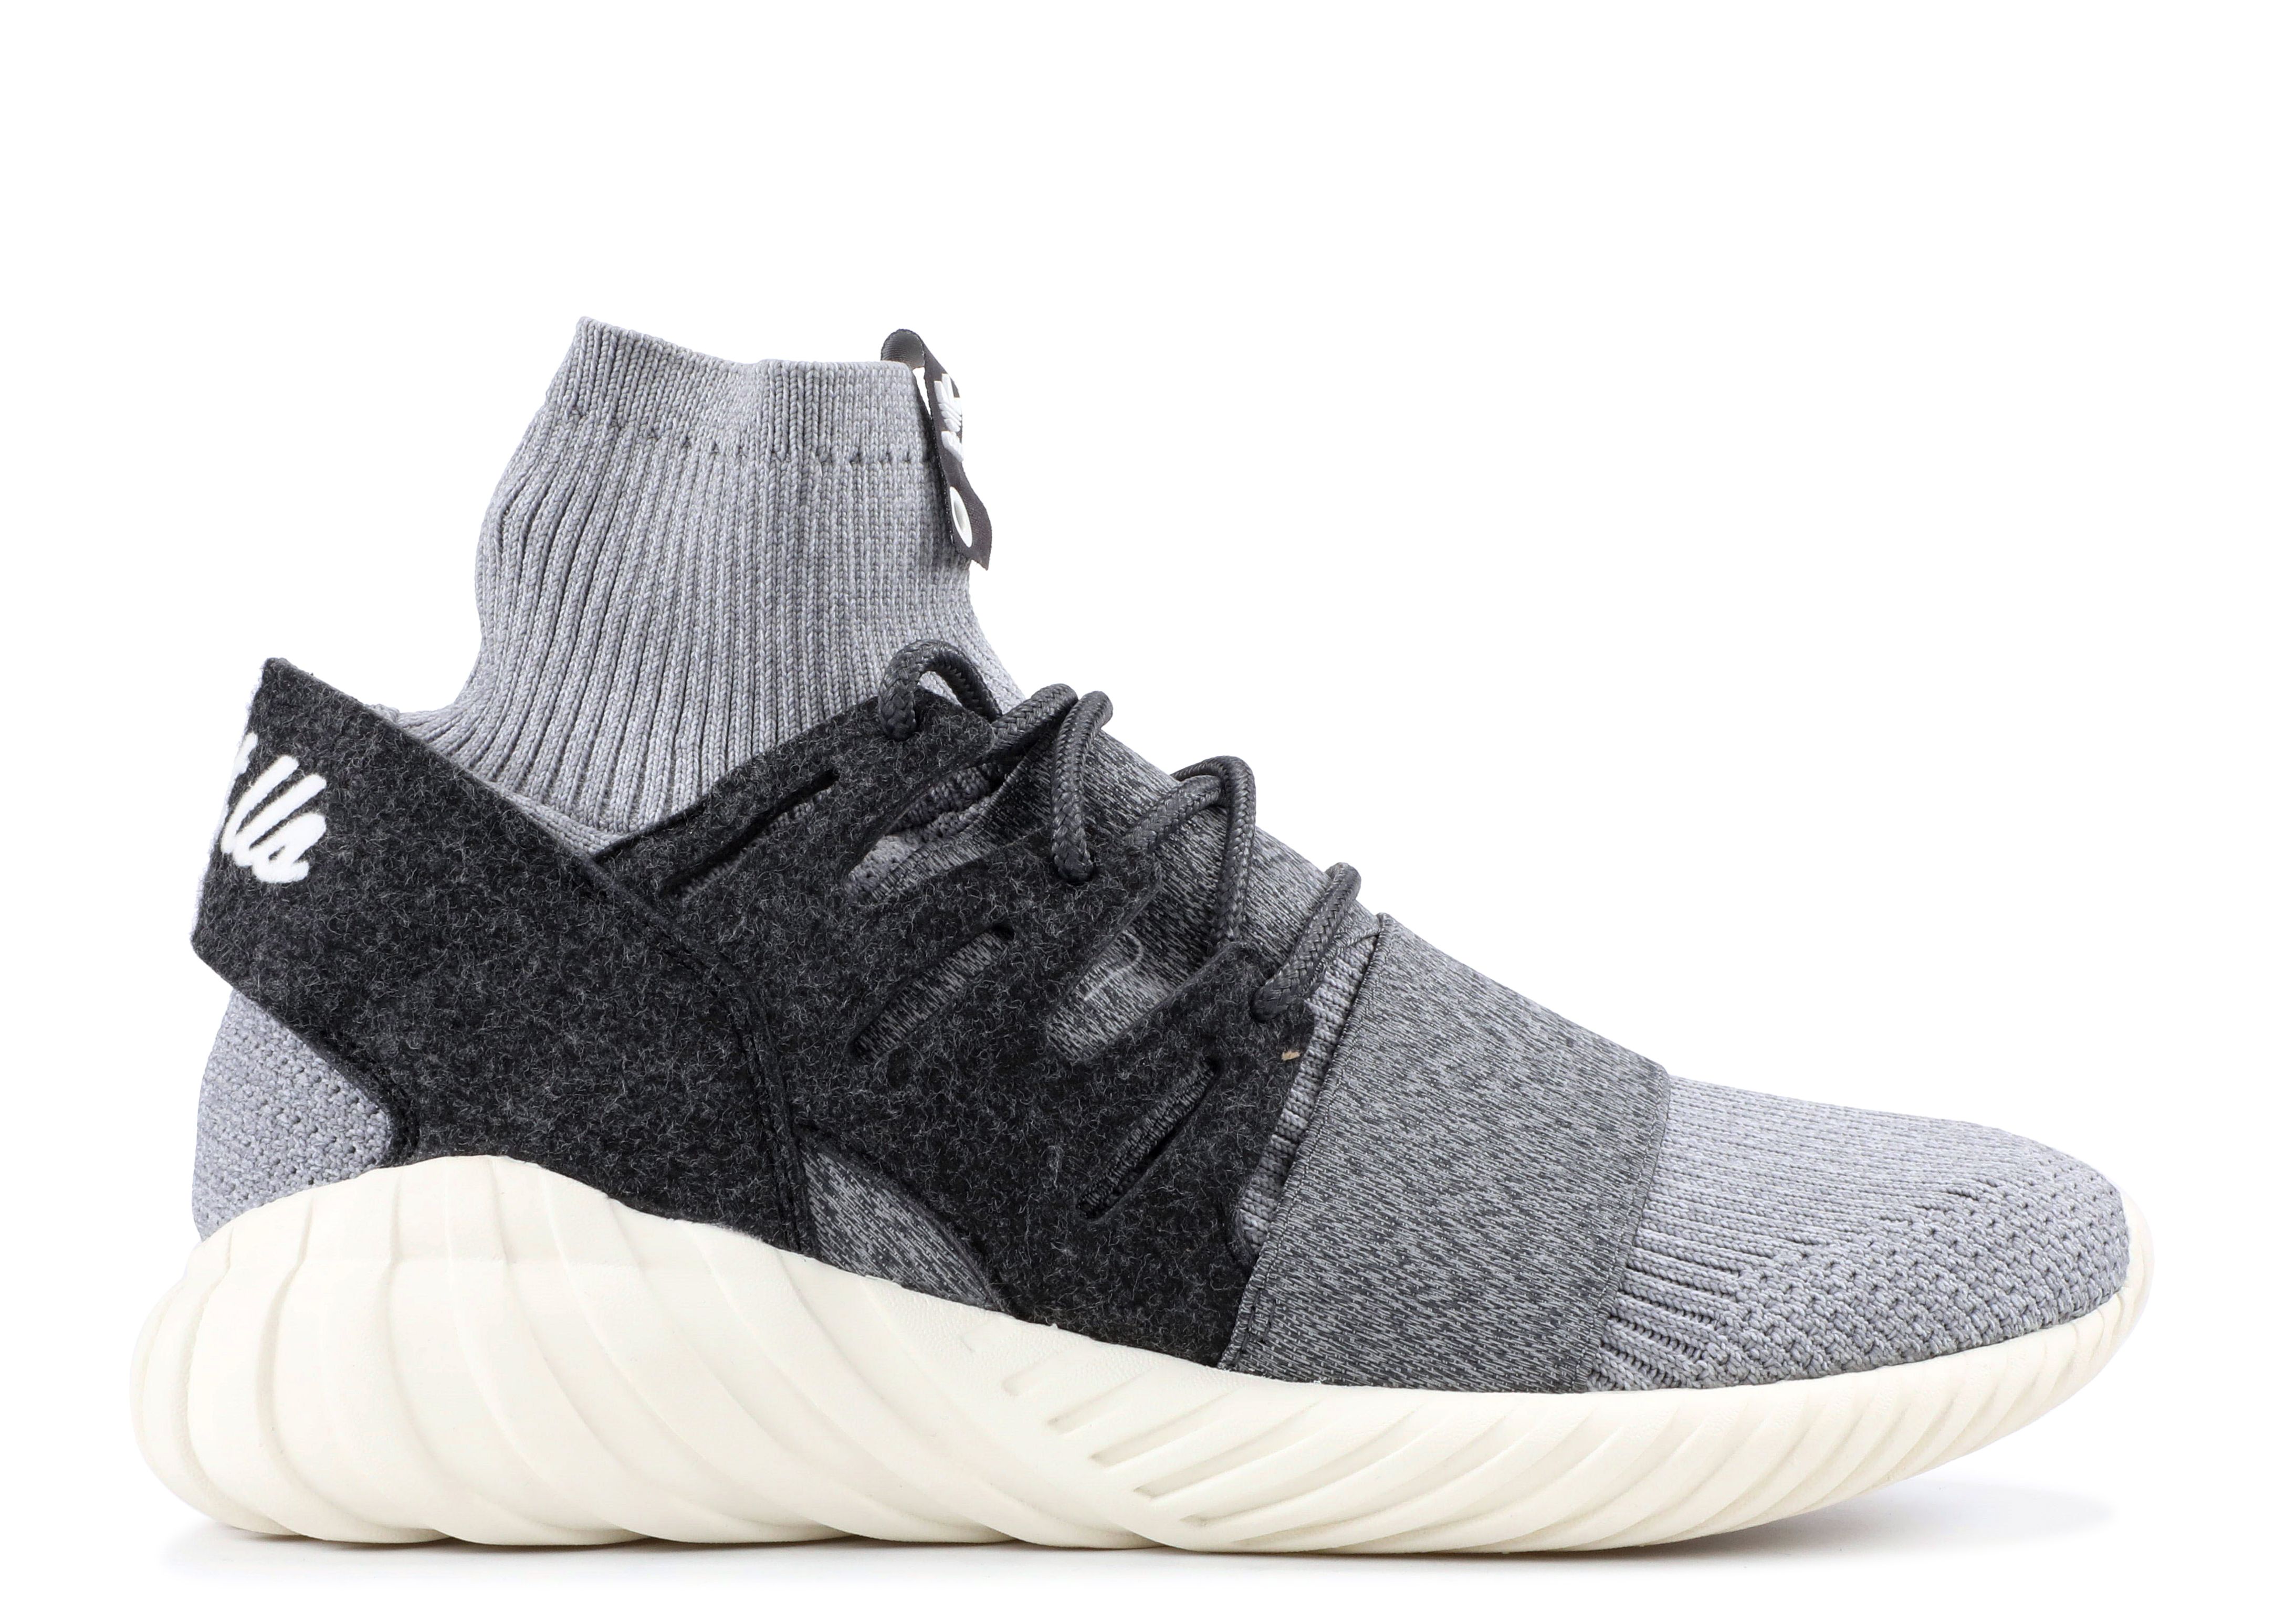 Slide Your Feet Into the Latest Laceless adidas WMNs Tubular Defiant